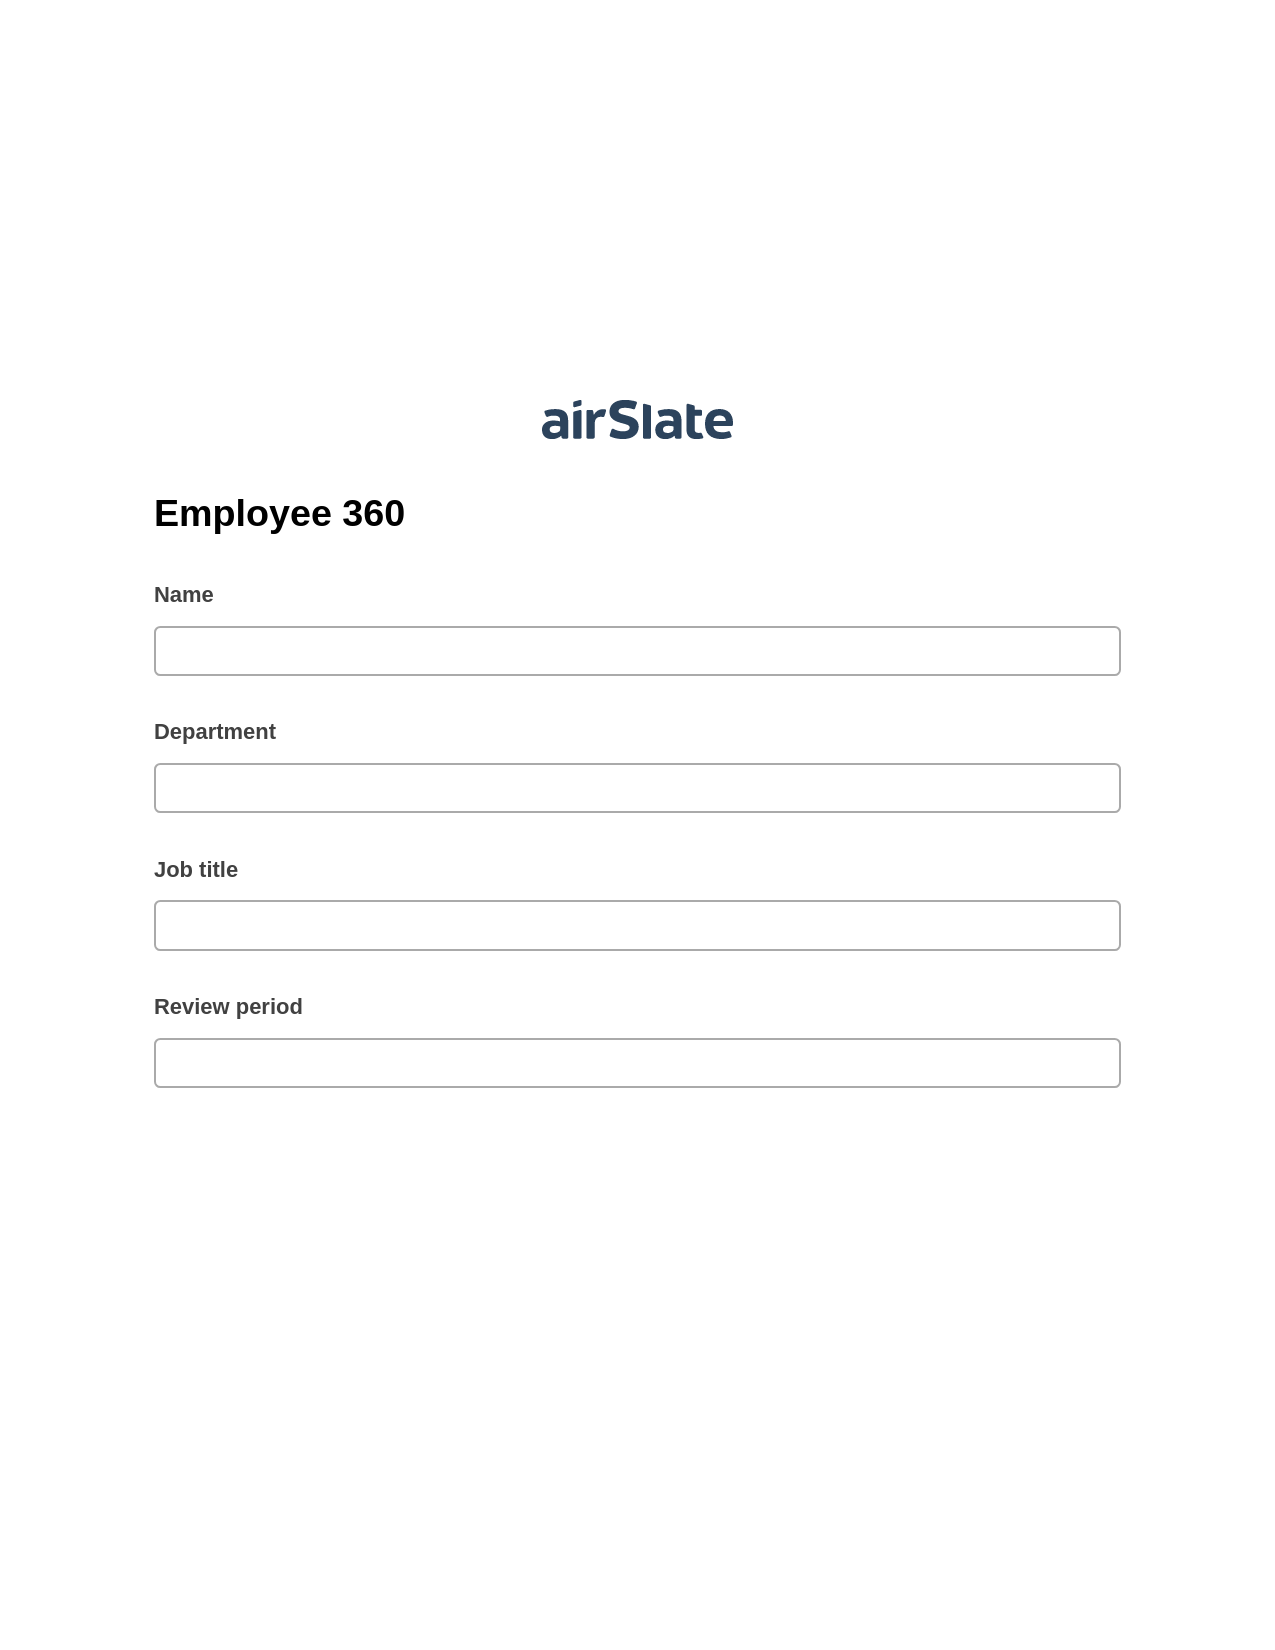 Employee 360 Pre-fill from CSV File Bot, Export to MS Dynamics 365 Bot, Export to Smartsheet